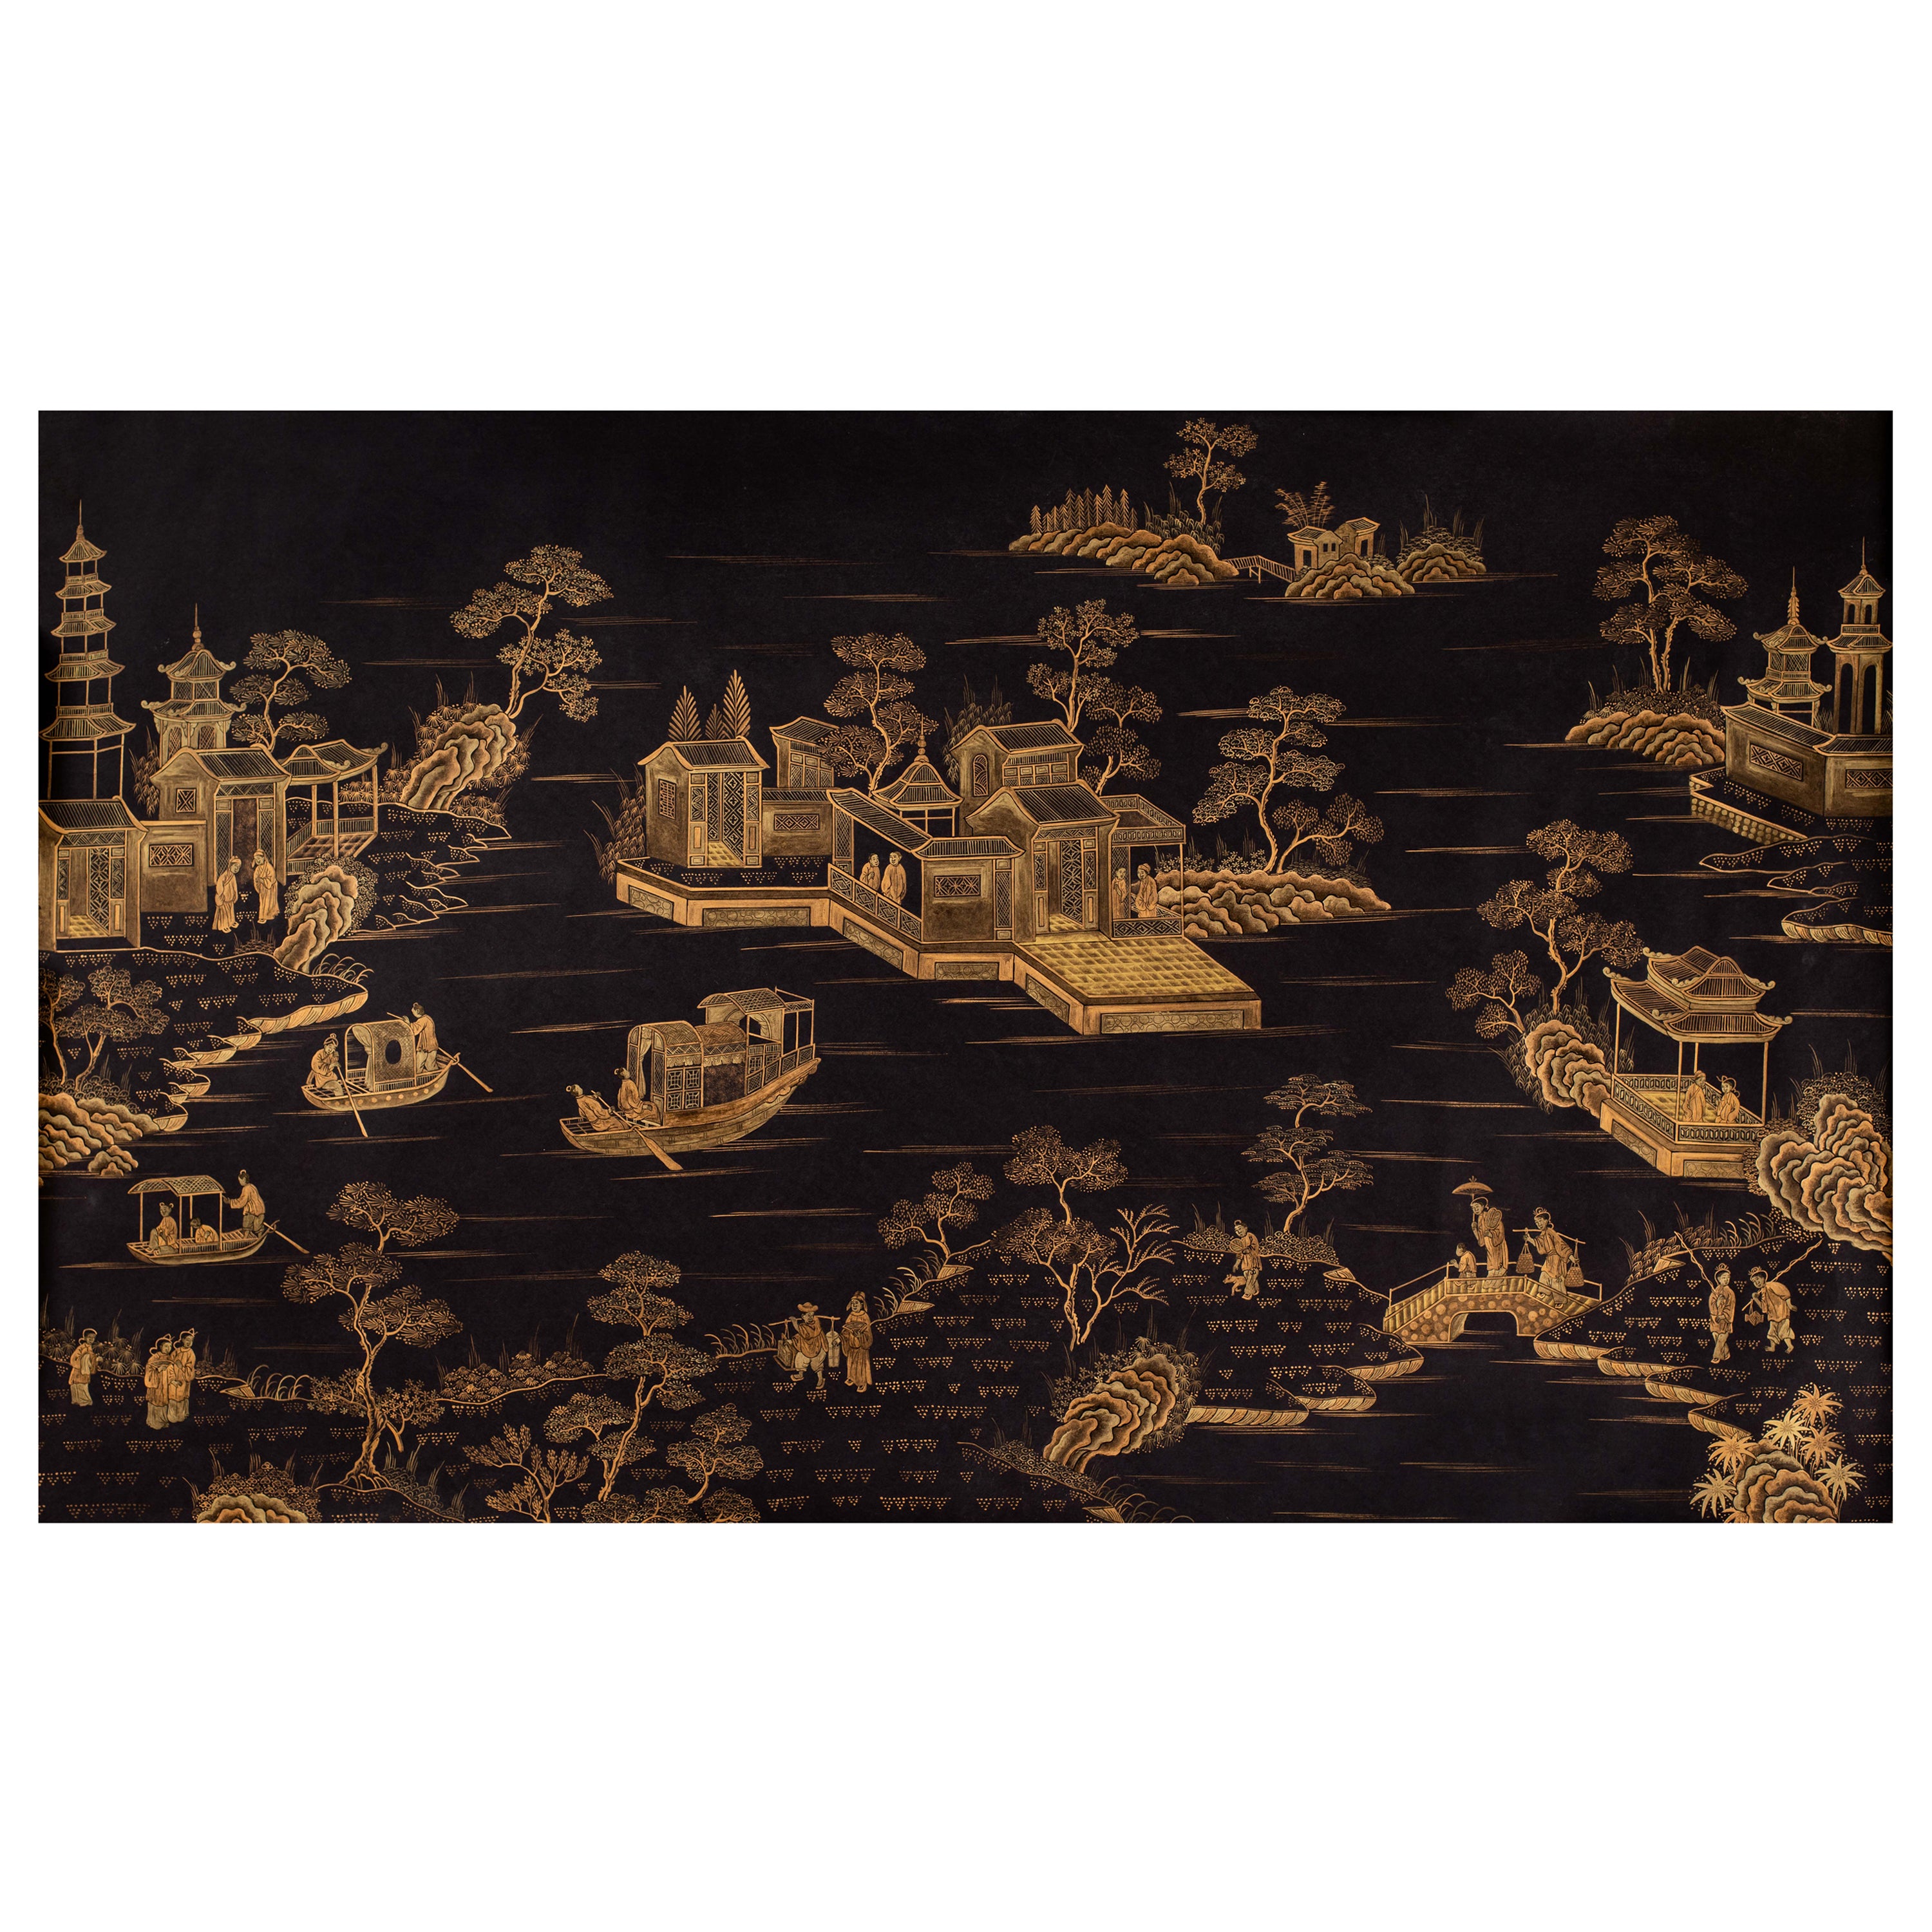 Chinoiserie Hand-Painted Wallpaper Panels of Golden Pavilions on Black For Sale